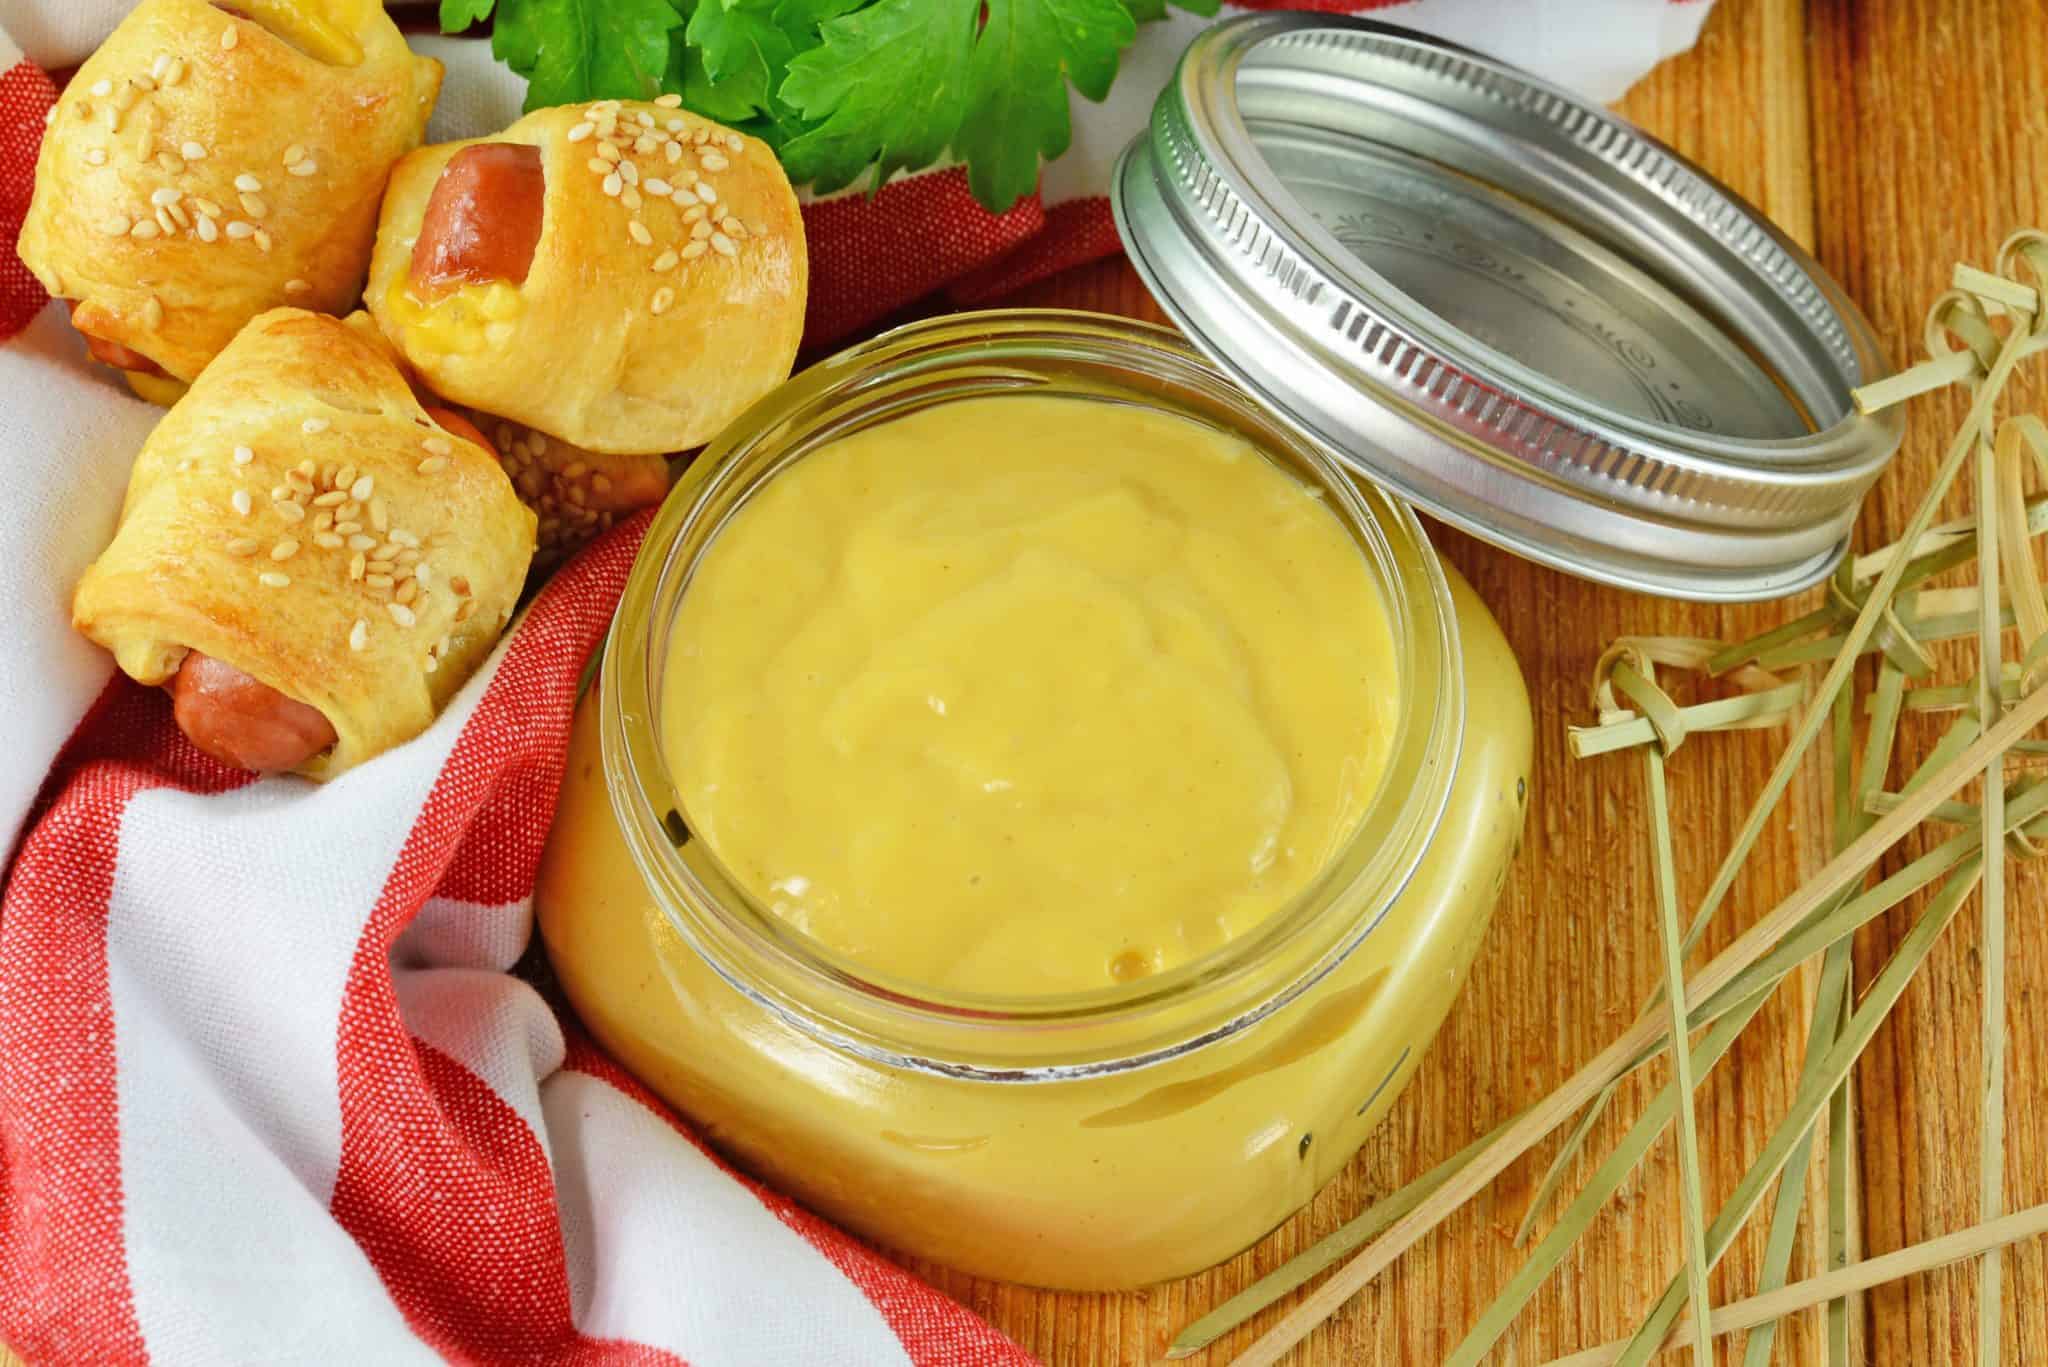 Honey Mustard sauce is one of the most versatile condiments out there. Use it as a salad dressing, dipping sauce, marinade or seasoning! #honeymustardrecipe #howtomakehoneymustard #honeymustardsauce www.savoryexperiments.com